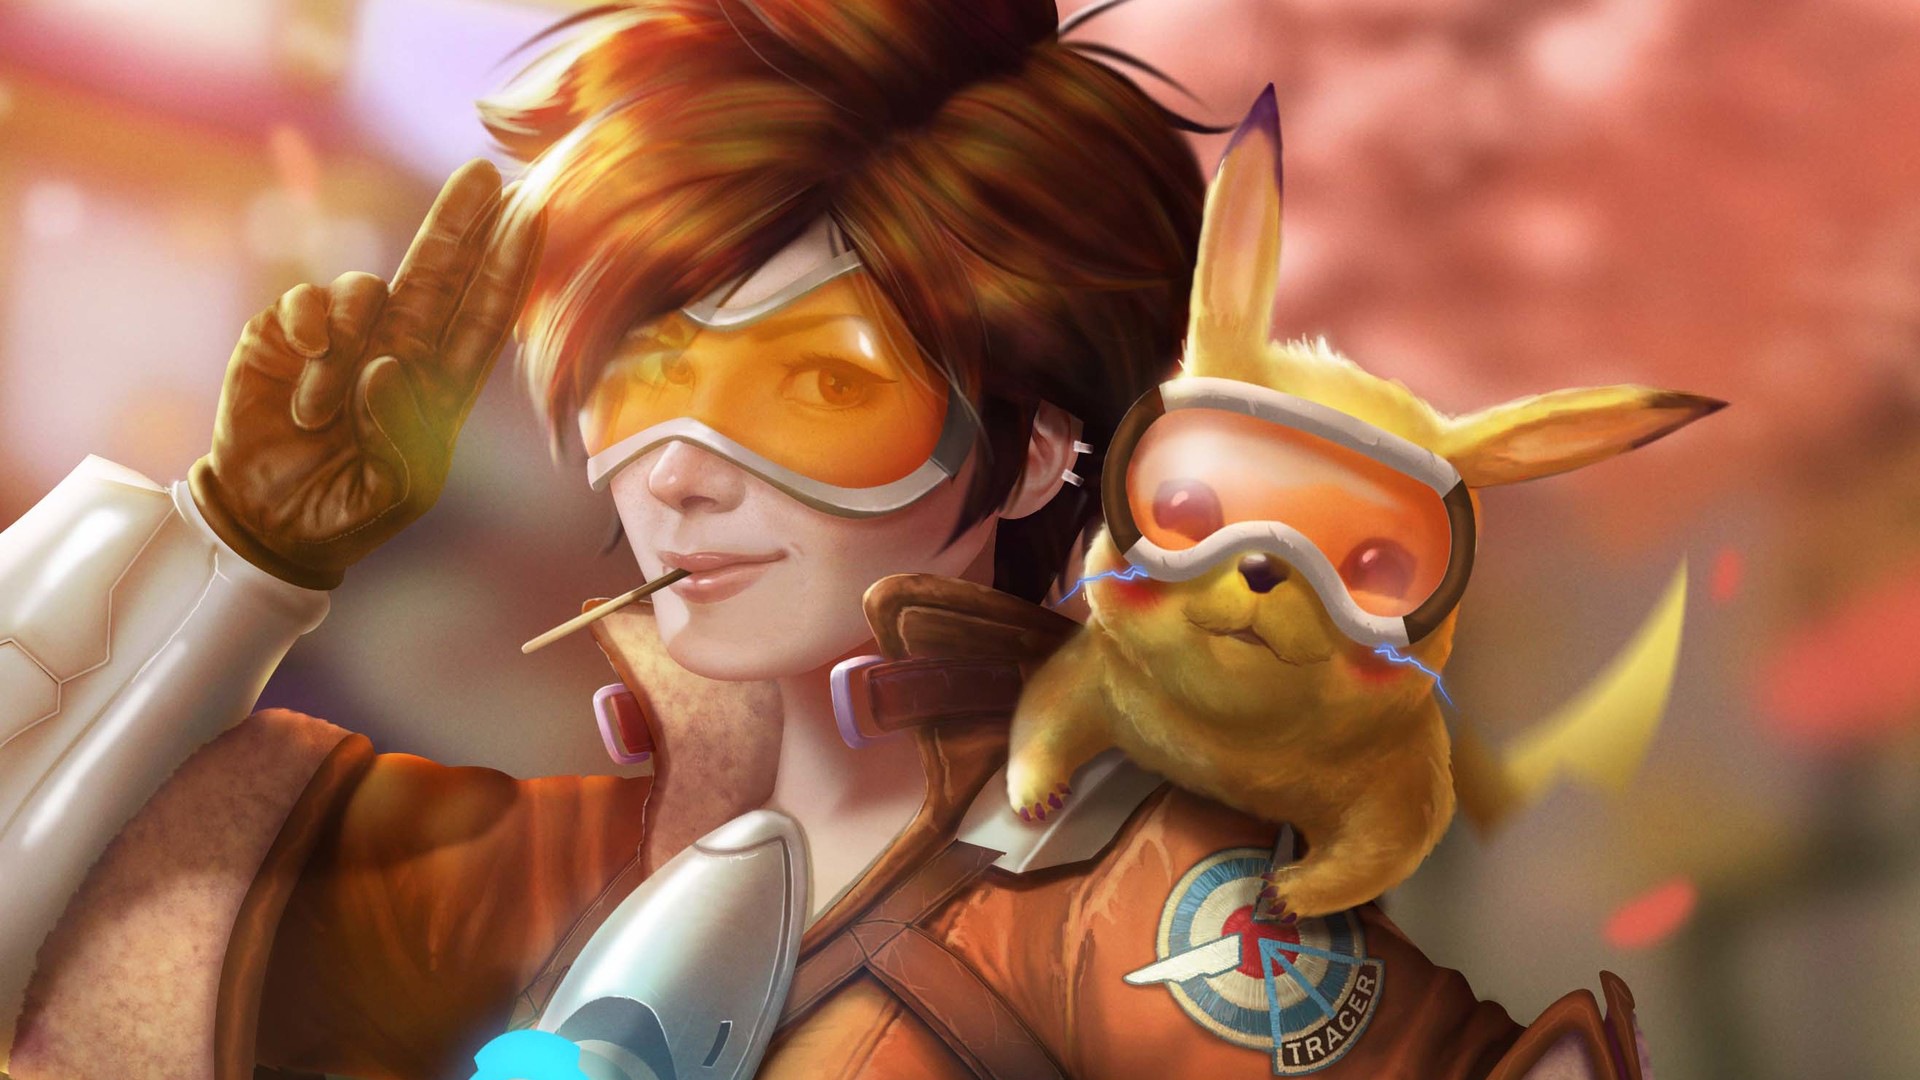 Wallpaper Tracer, Pikachu, game, crossover